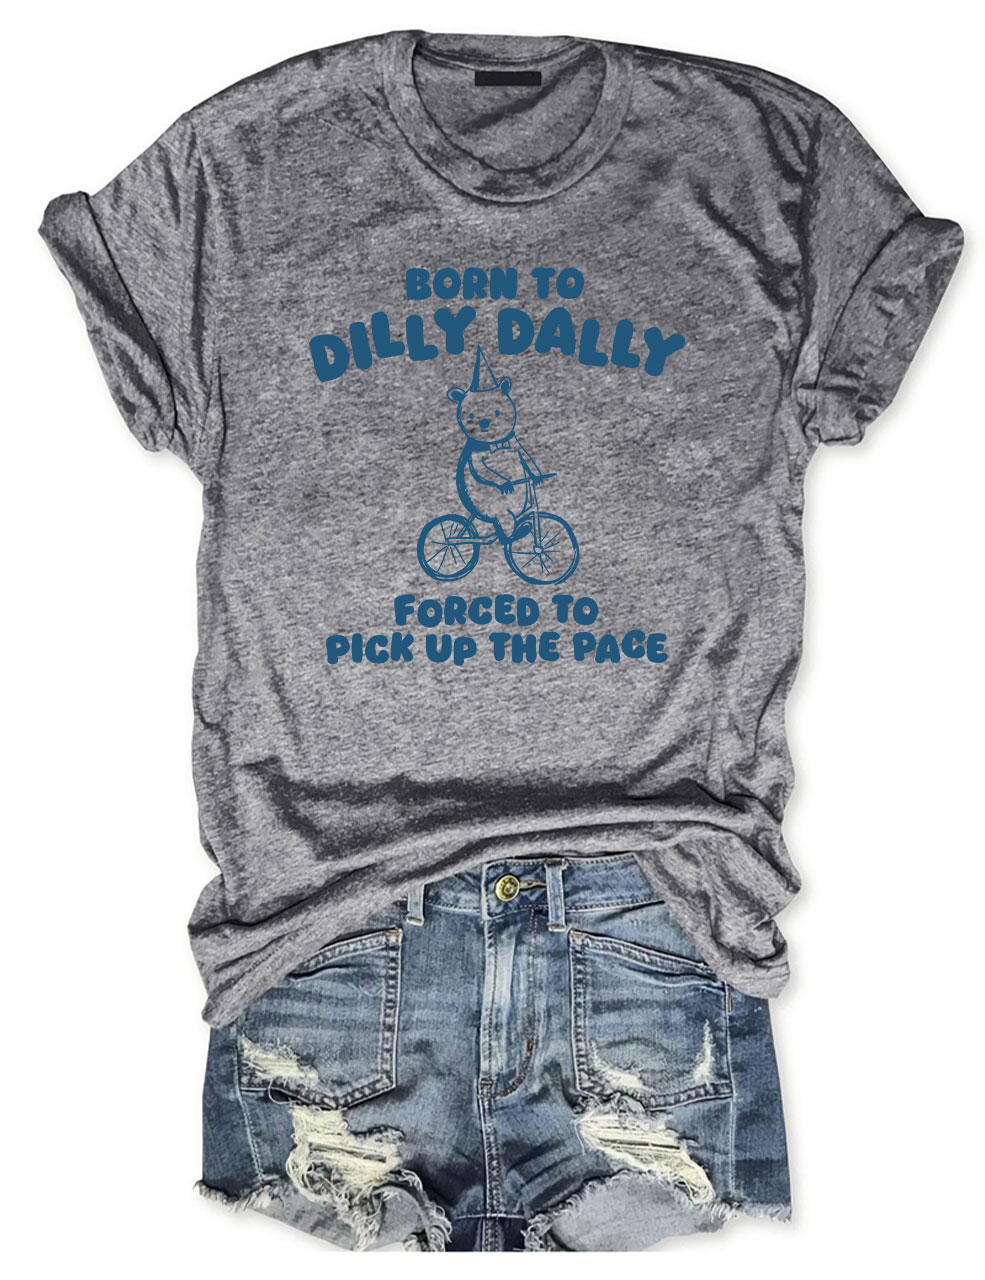 Born To Dilly Dally T-shirt